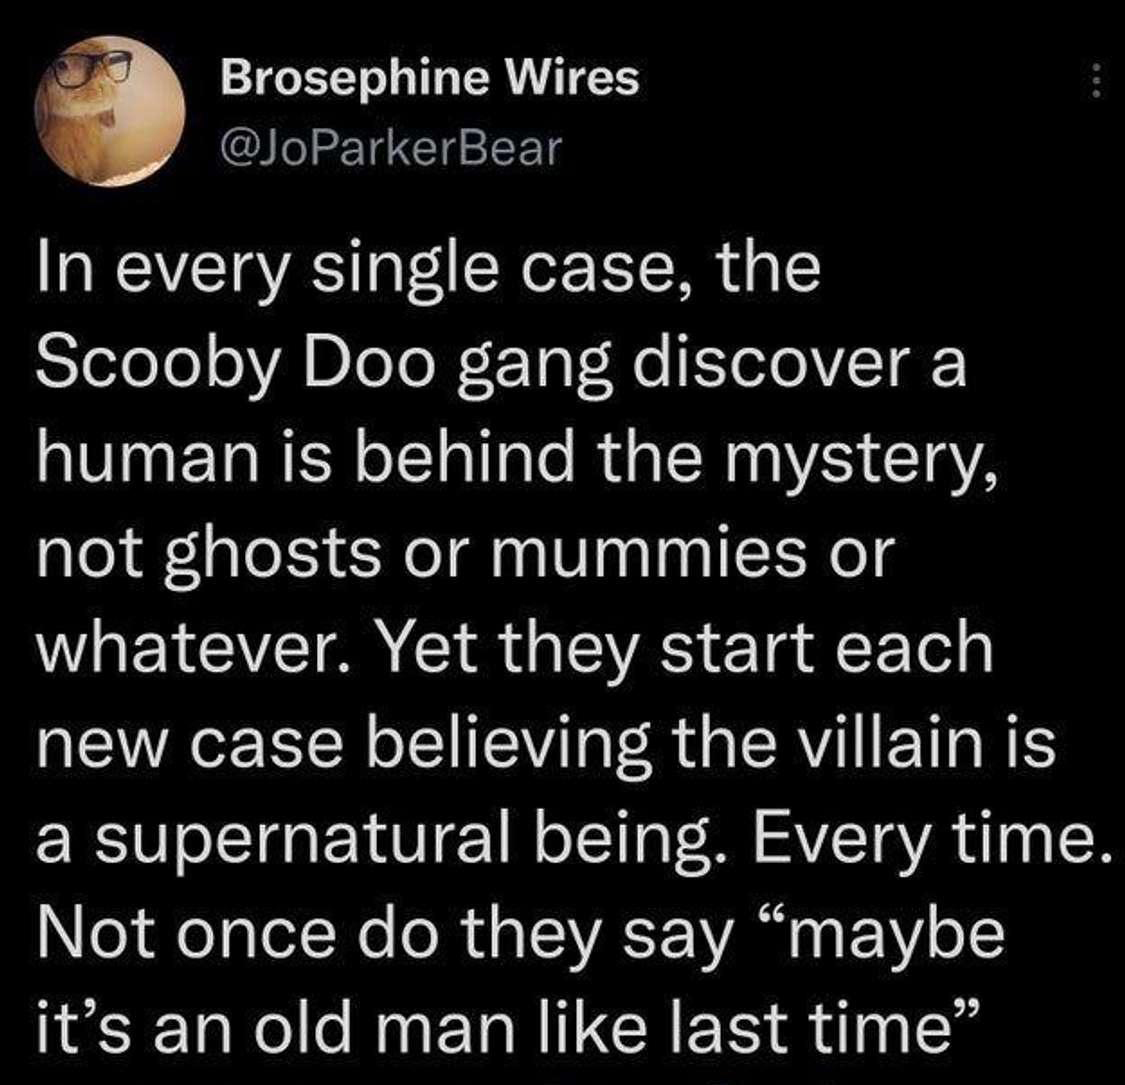 funny tweets - hot takes - Brosephine Wires In every single case, the Scooby Doo gang discover a human is behind the mystery, not ghosts or mummies or whatever. Yet they start each new case believing the villain is a supernatural being. Every time. Not on